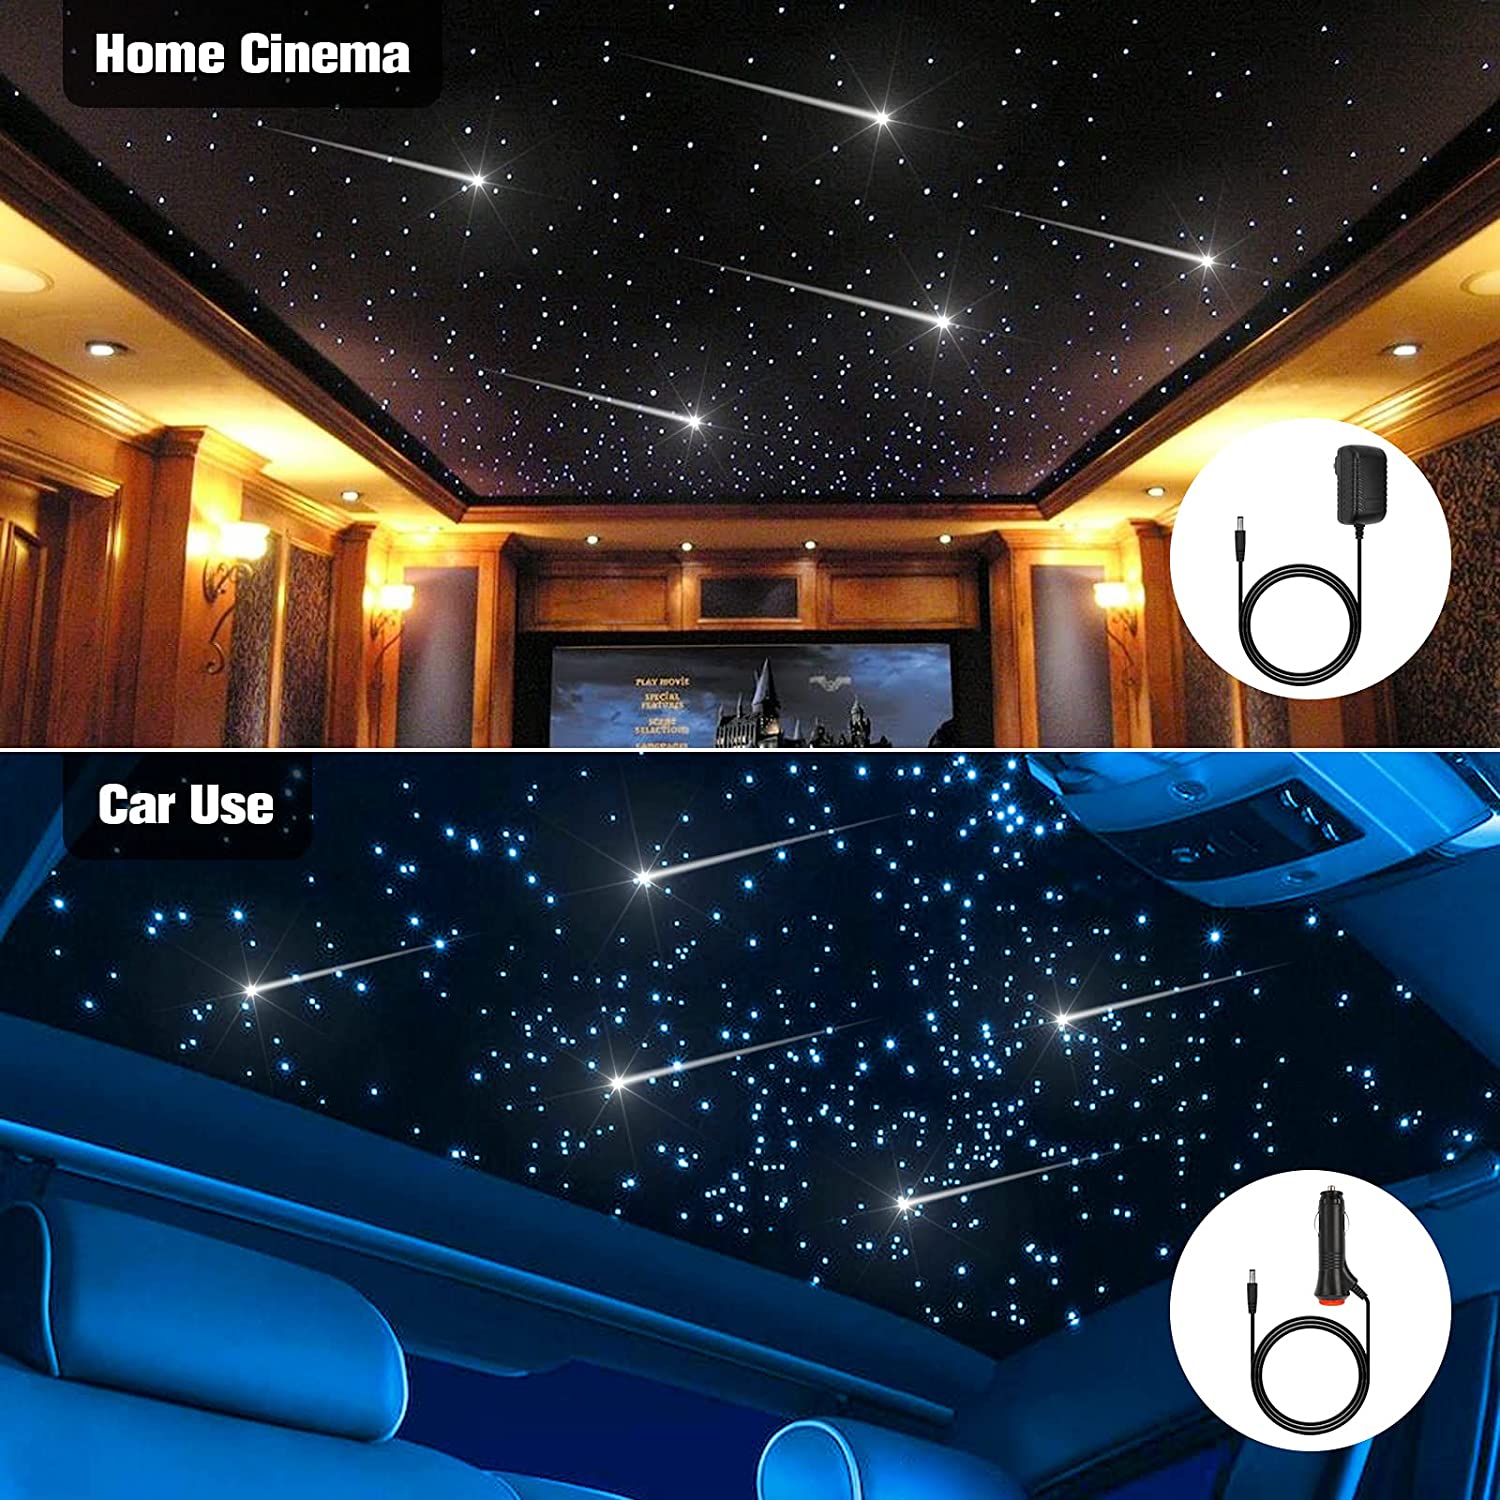 12W Shooting Star Headliner Kit (Star Ceiling +Shooting Stars) for Car Truck, Yacht Boat & Home Theaters | SanliLED.shop